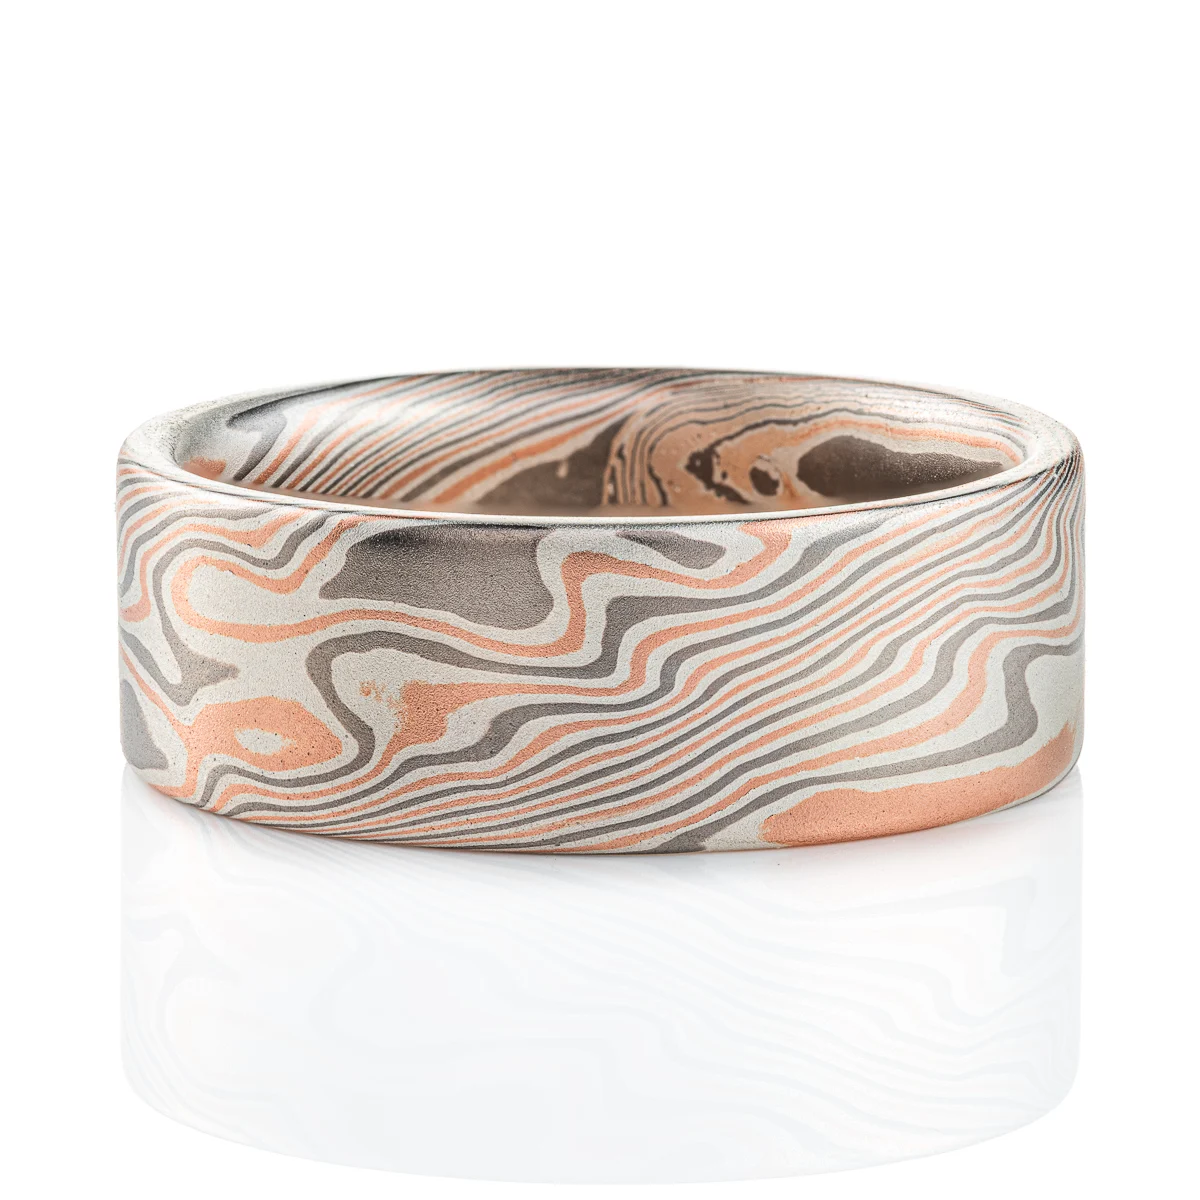 Large, wide mokume ring with bold twist style patterning running diagonally across, with a flat profile and smooth finish. Made with alternating layers of red gold, silver and palladium.